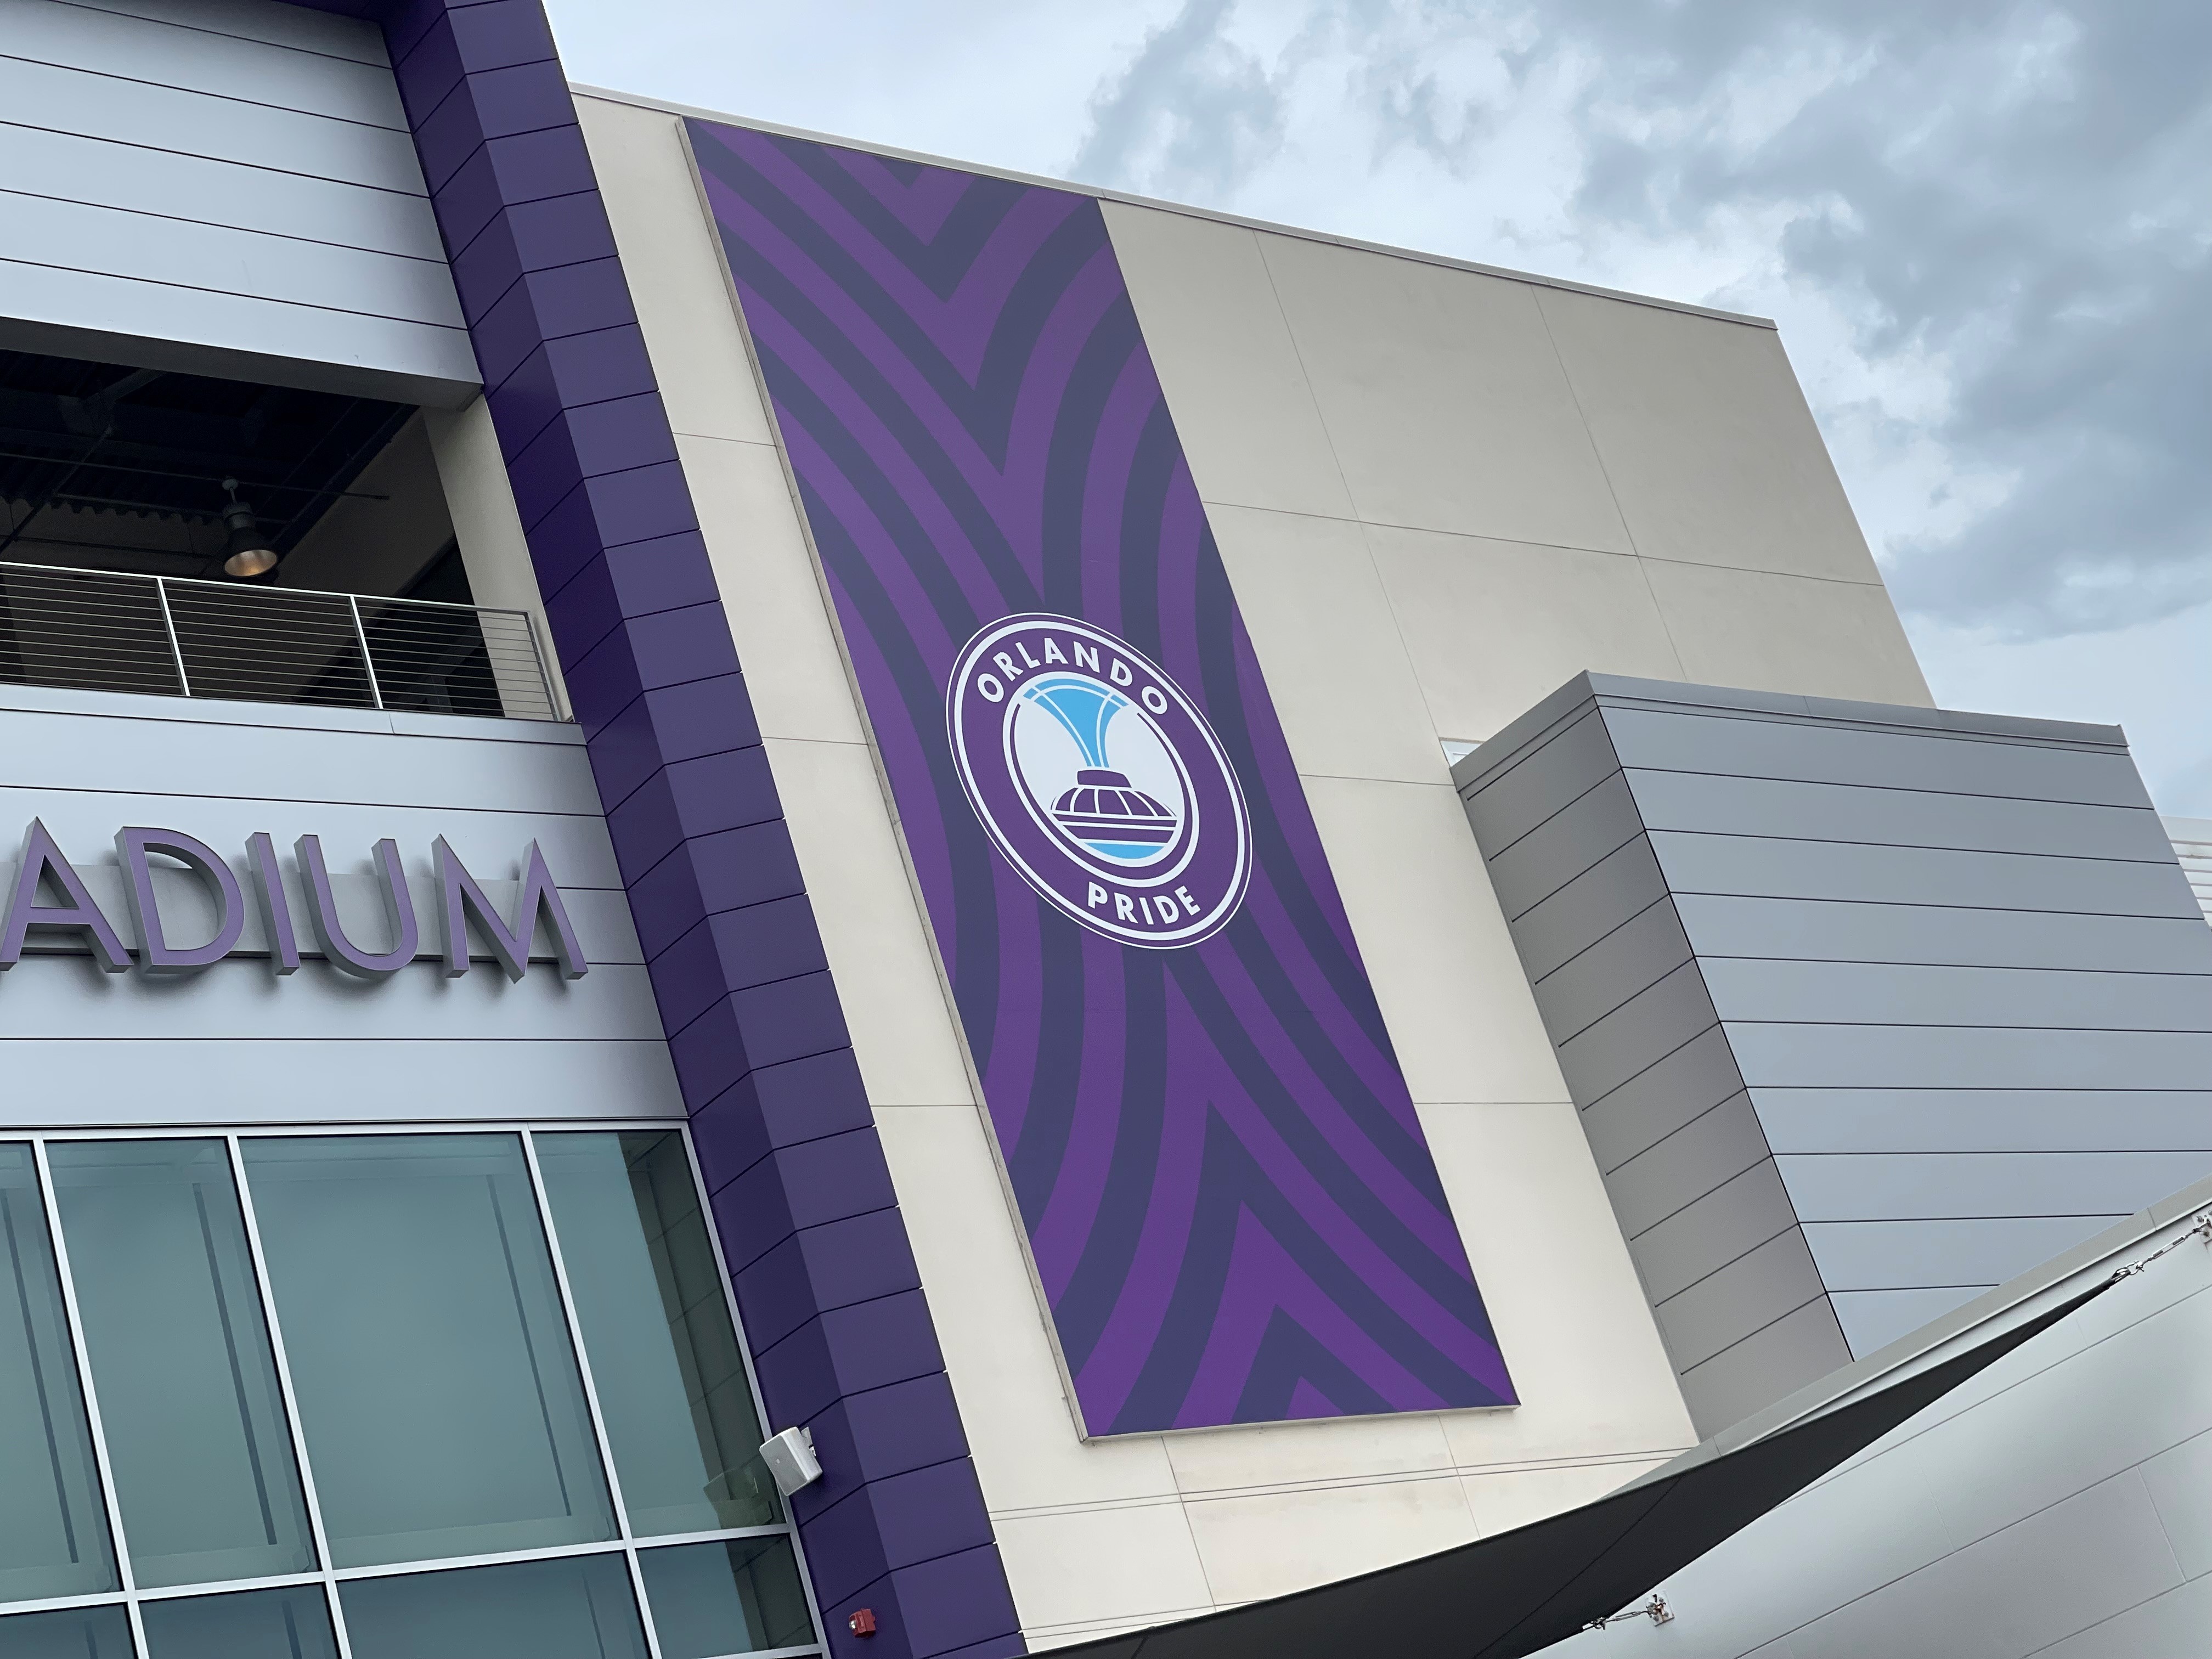 Orange County Welcomes Orlando City Soccer Club Lions to Their New